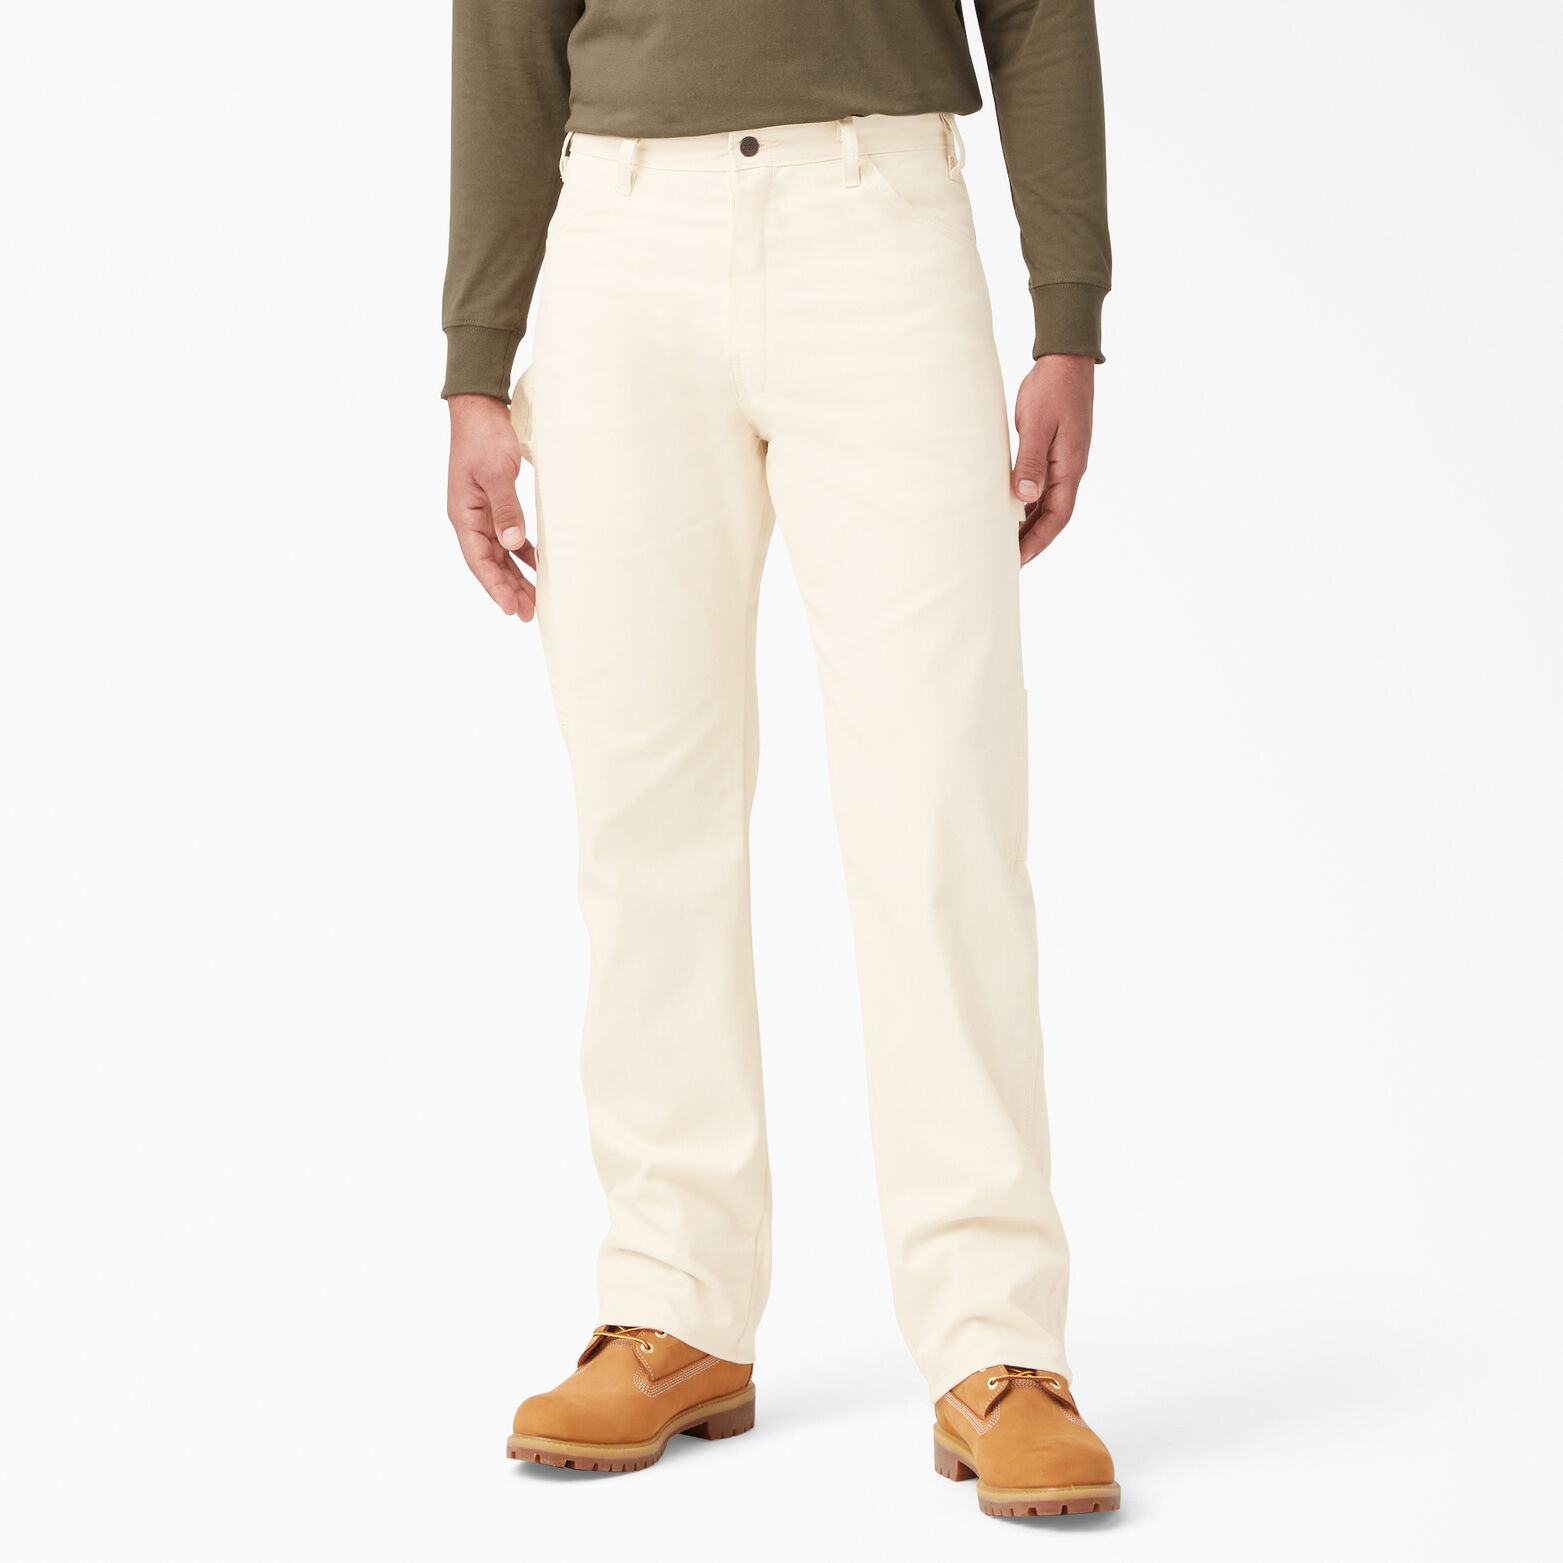 Dickies Men's Carpenter Pants Relaxed Fit Duck Canvas 9-Pocket  Straight Leg Pant